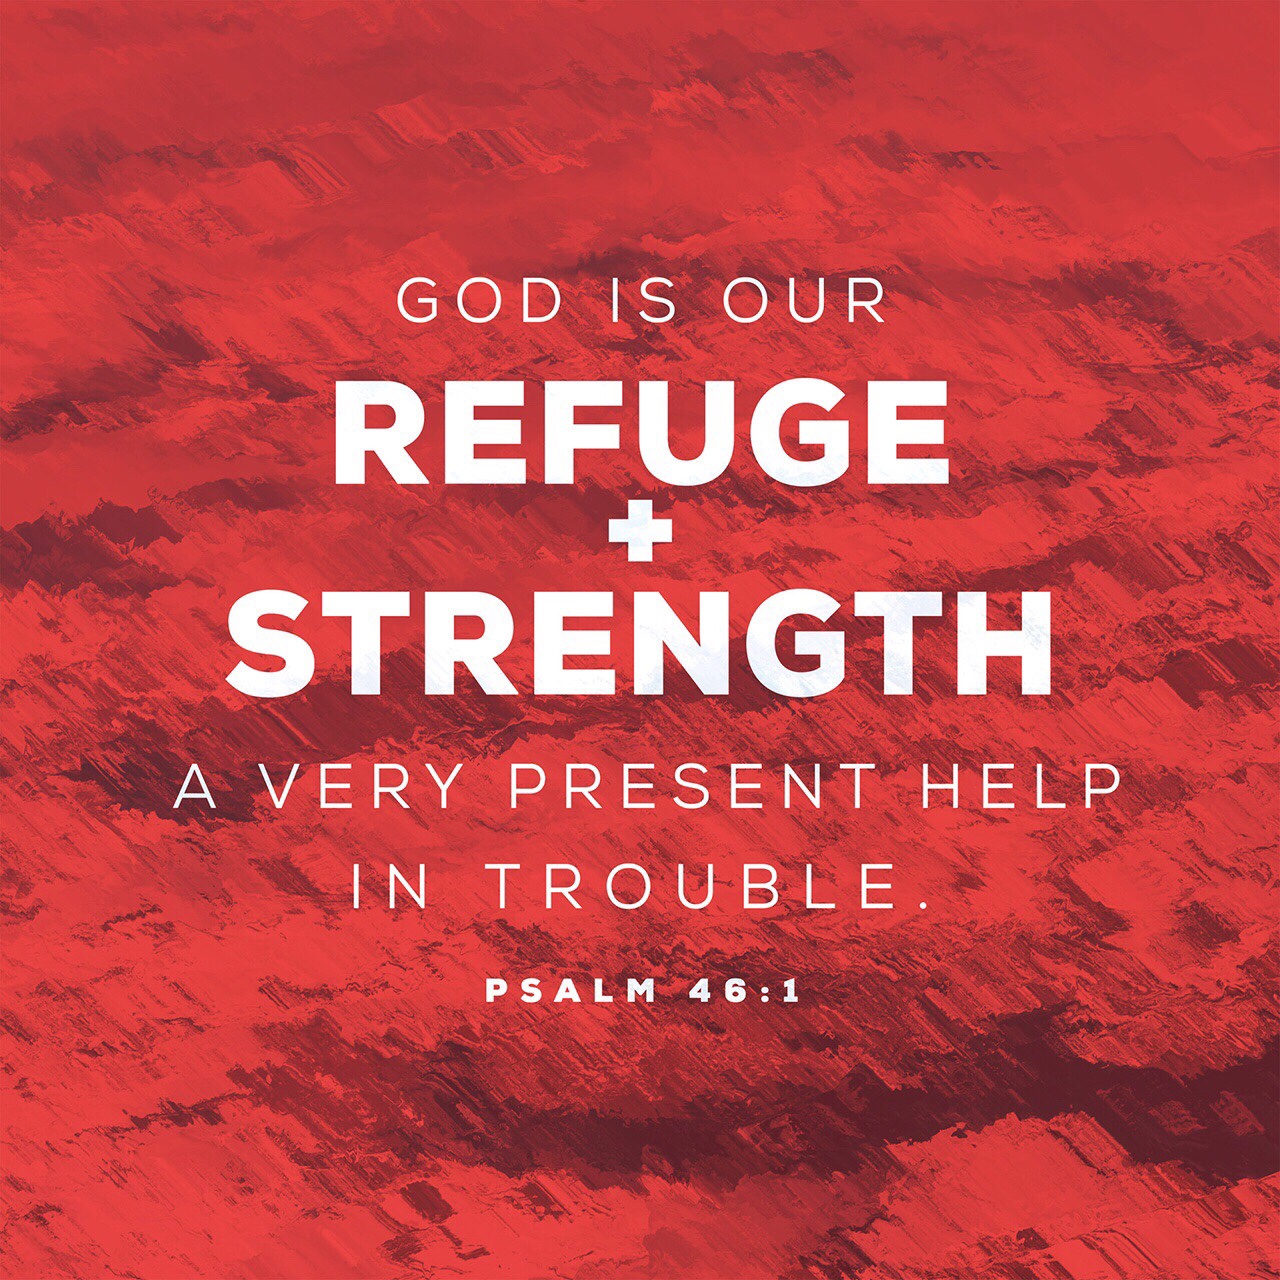 VOTD August 14 - God is our refuge and strength, A very present help in trouble. Psalm 46:1‬ ‭NASB‬‬